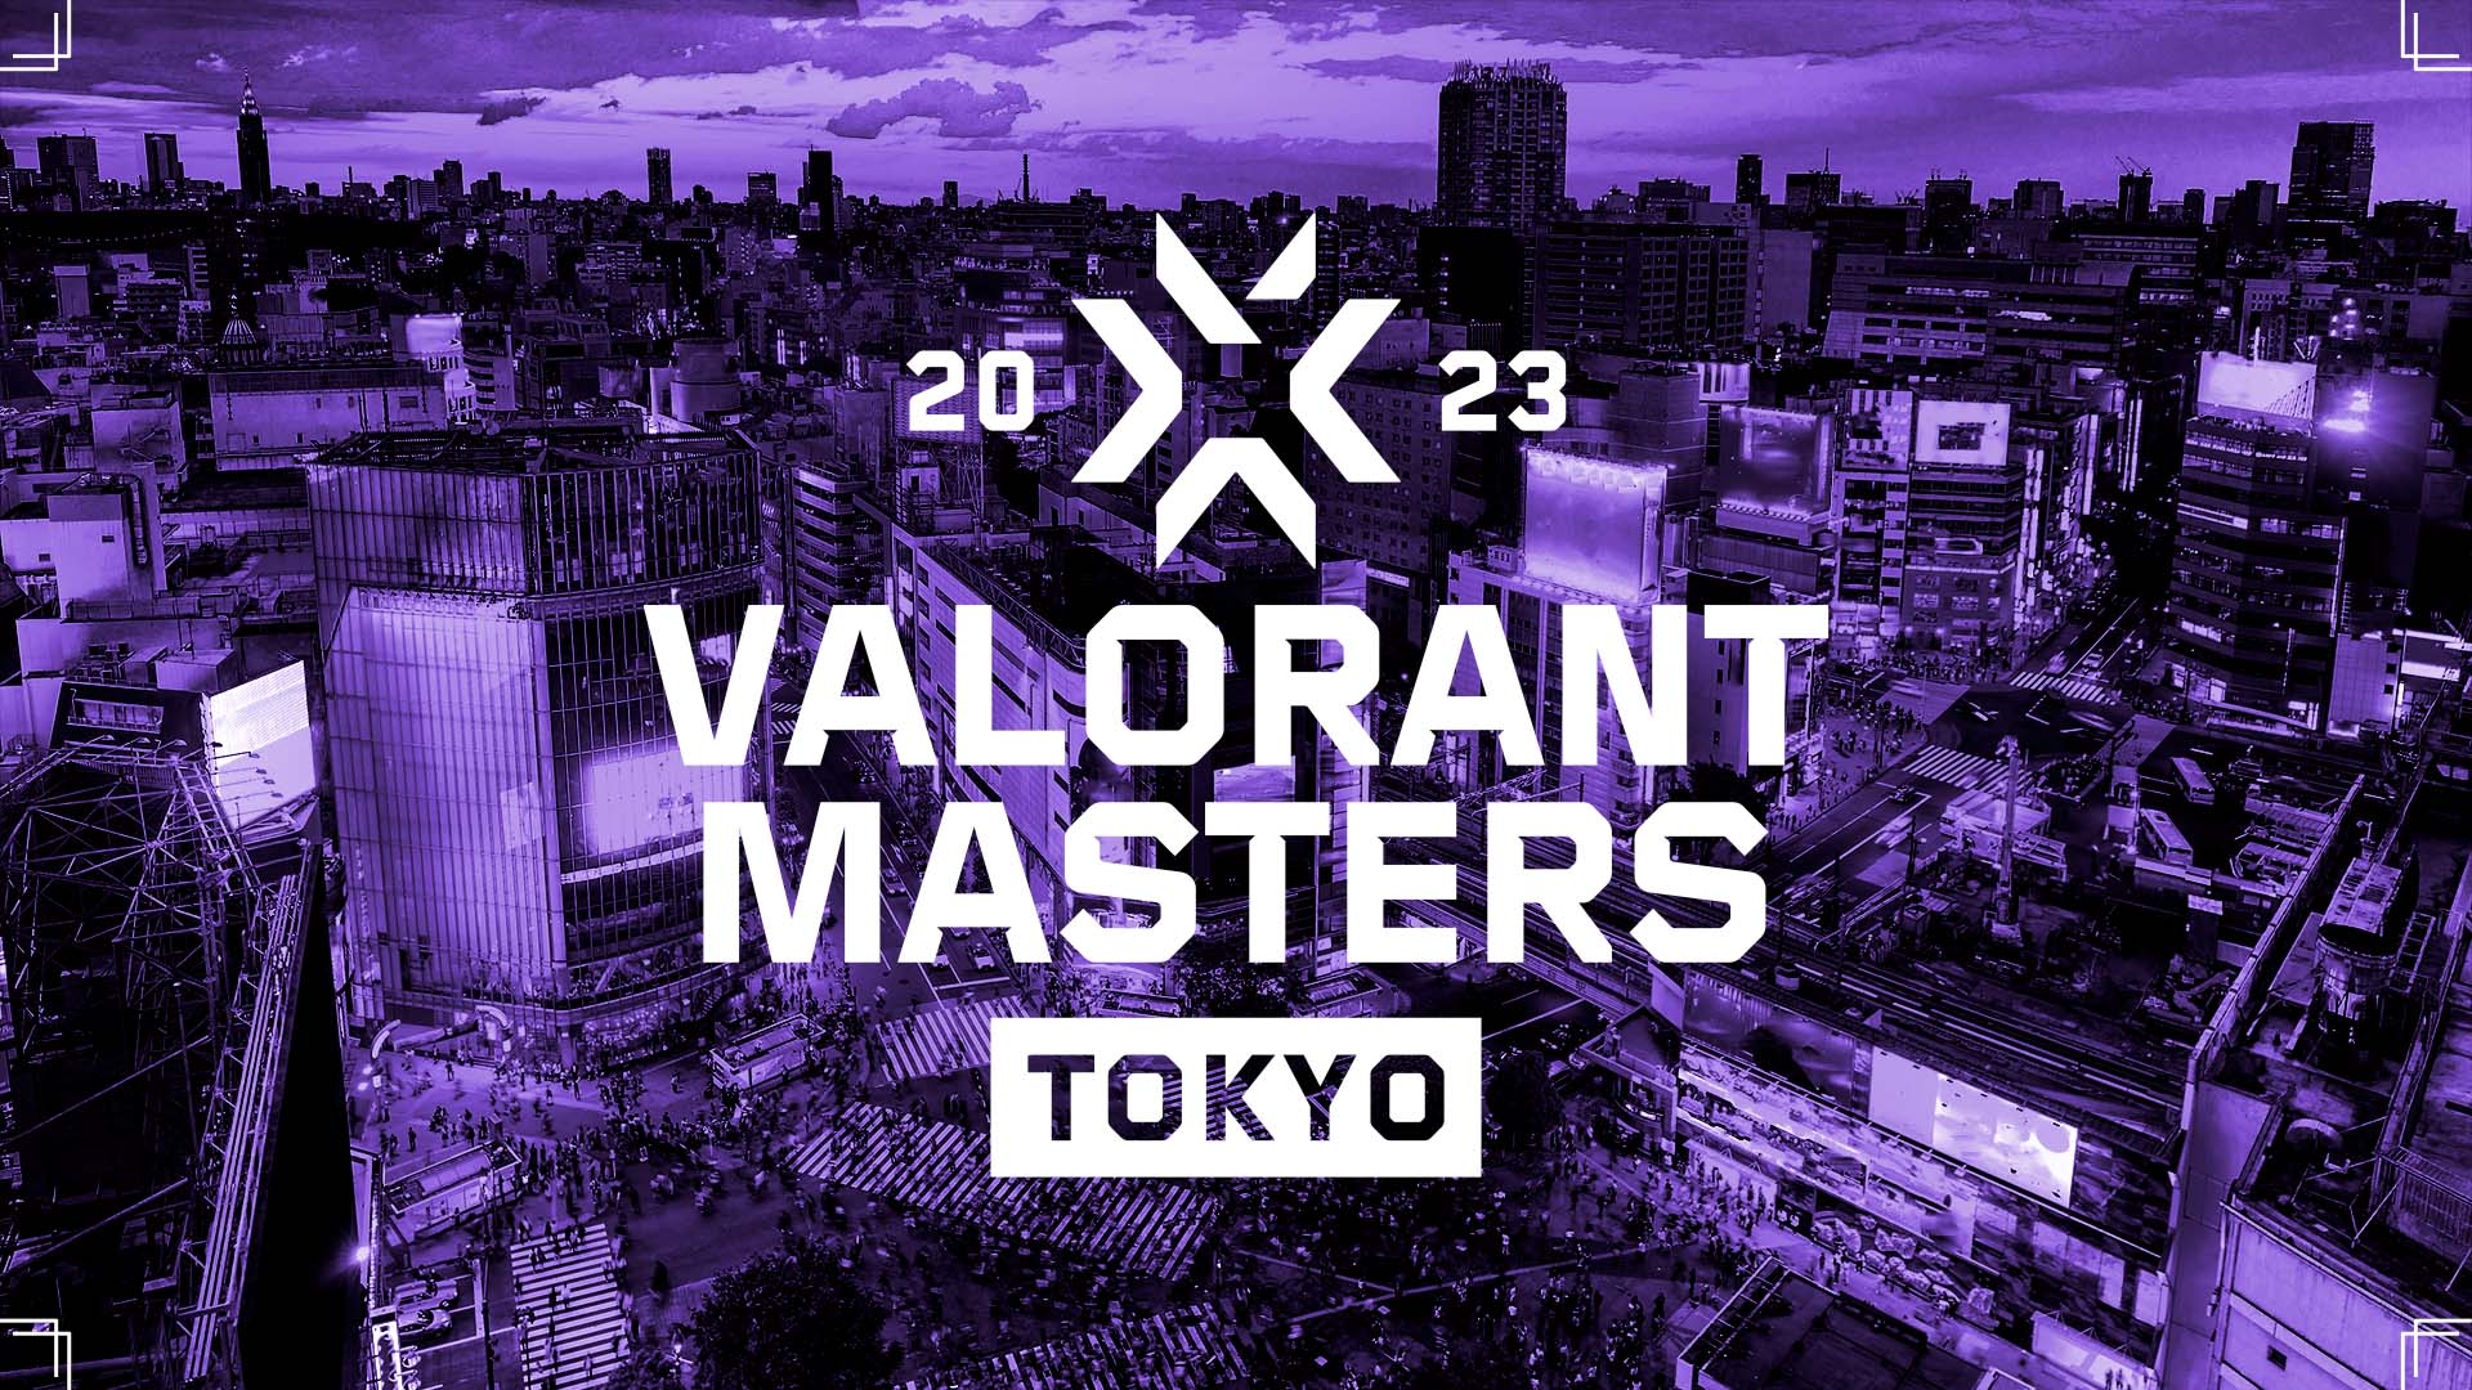 VCT Masters Tokyo: Schedule, teams, format, venue, tickets - Esports  Illustrated